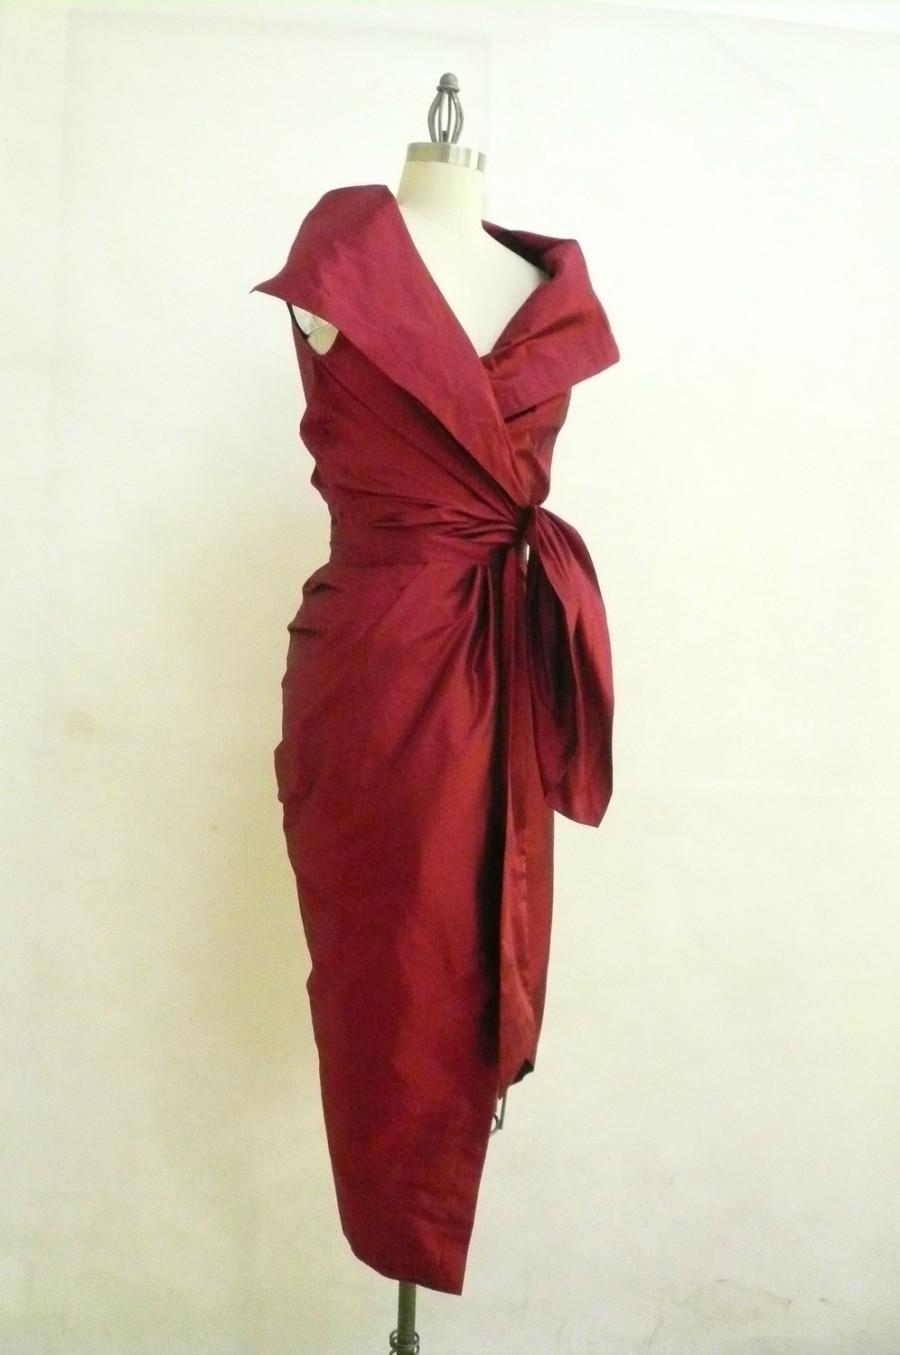 Wedding - Maria Severyna Burgundy Dupioni Wrap Dress - Mother of the Bride - Available in many colors